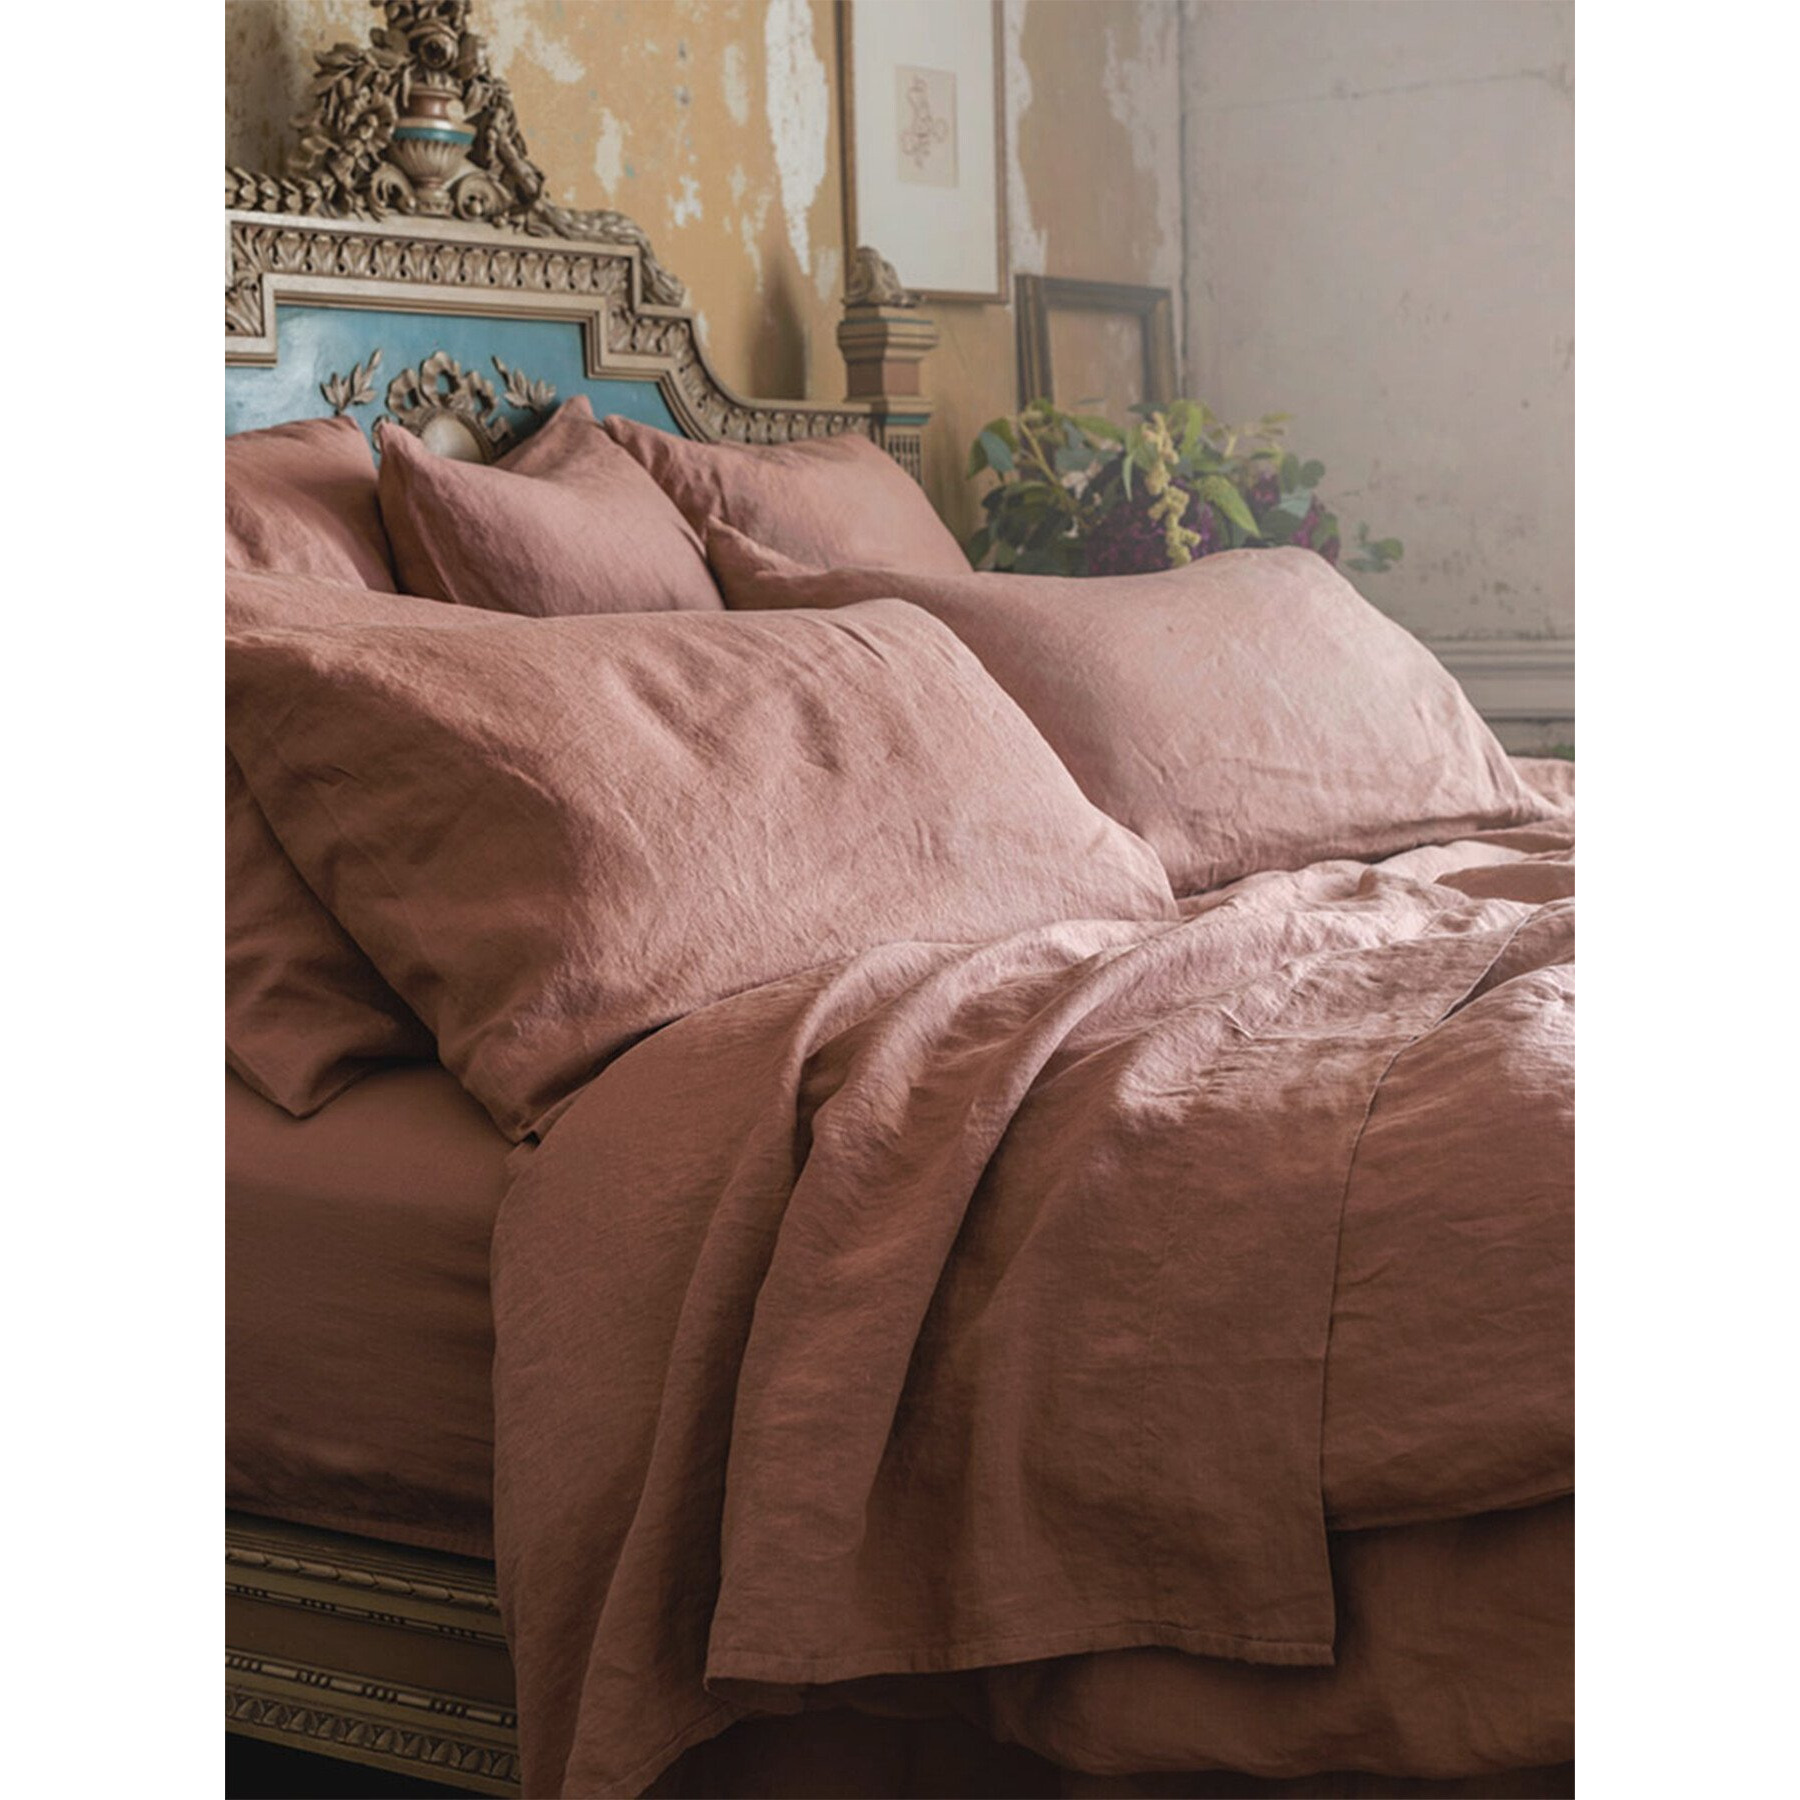 Piglet in Bed Linen Flat Sheet - Size Double Tan - image 1